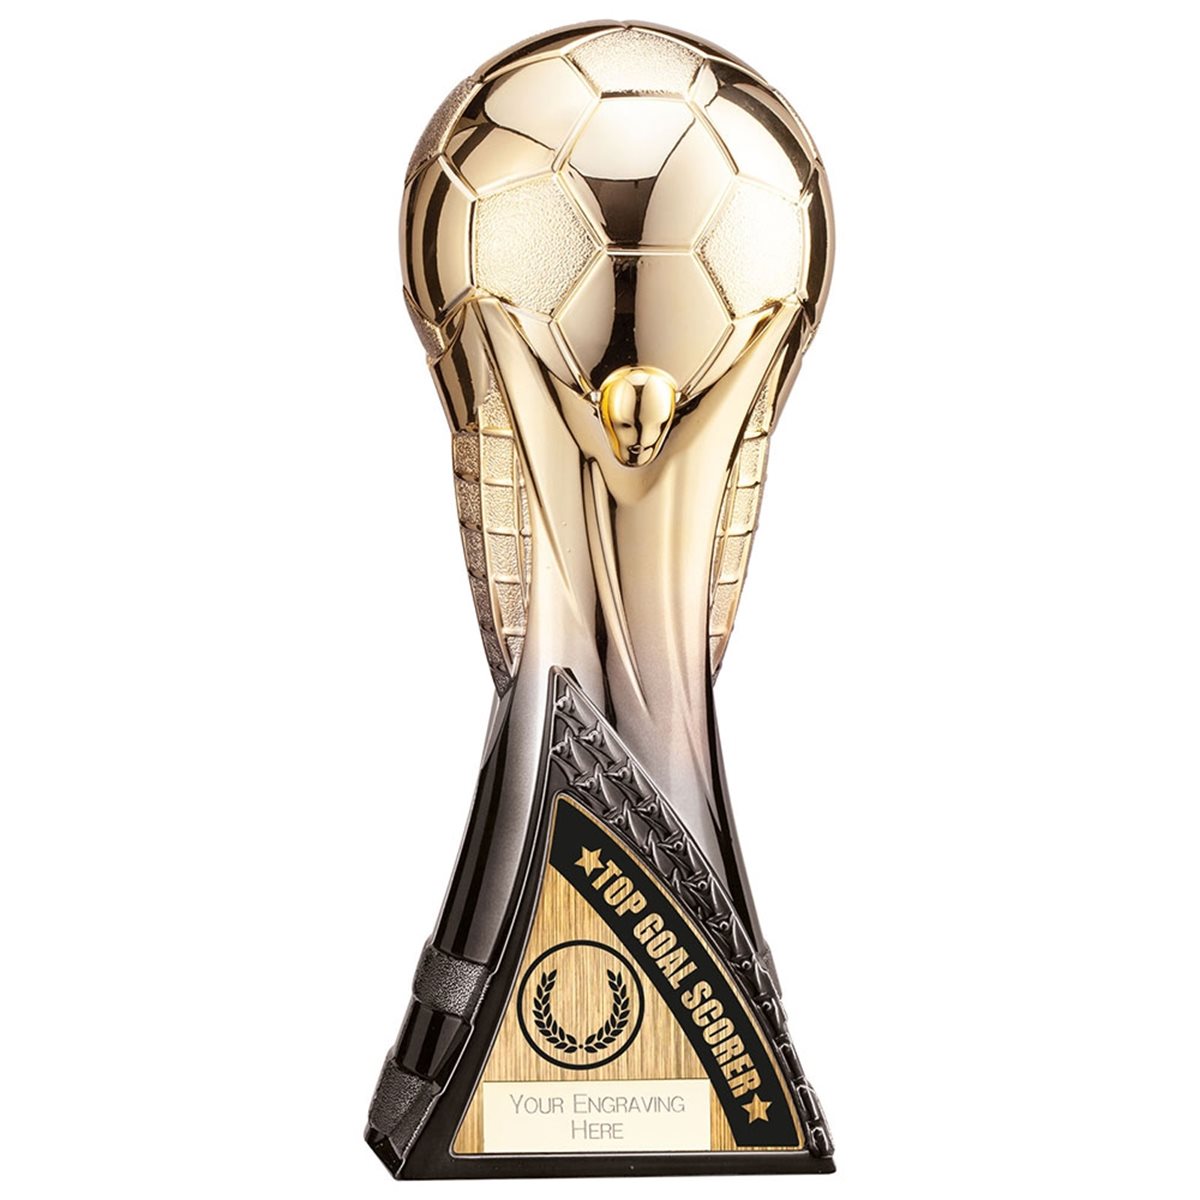 World Trophy Gold to Black Football Award PM22181C (Click to see all awards)